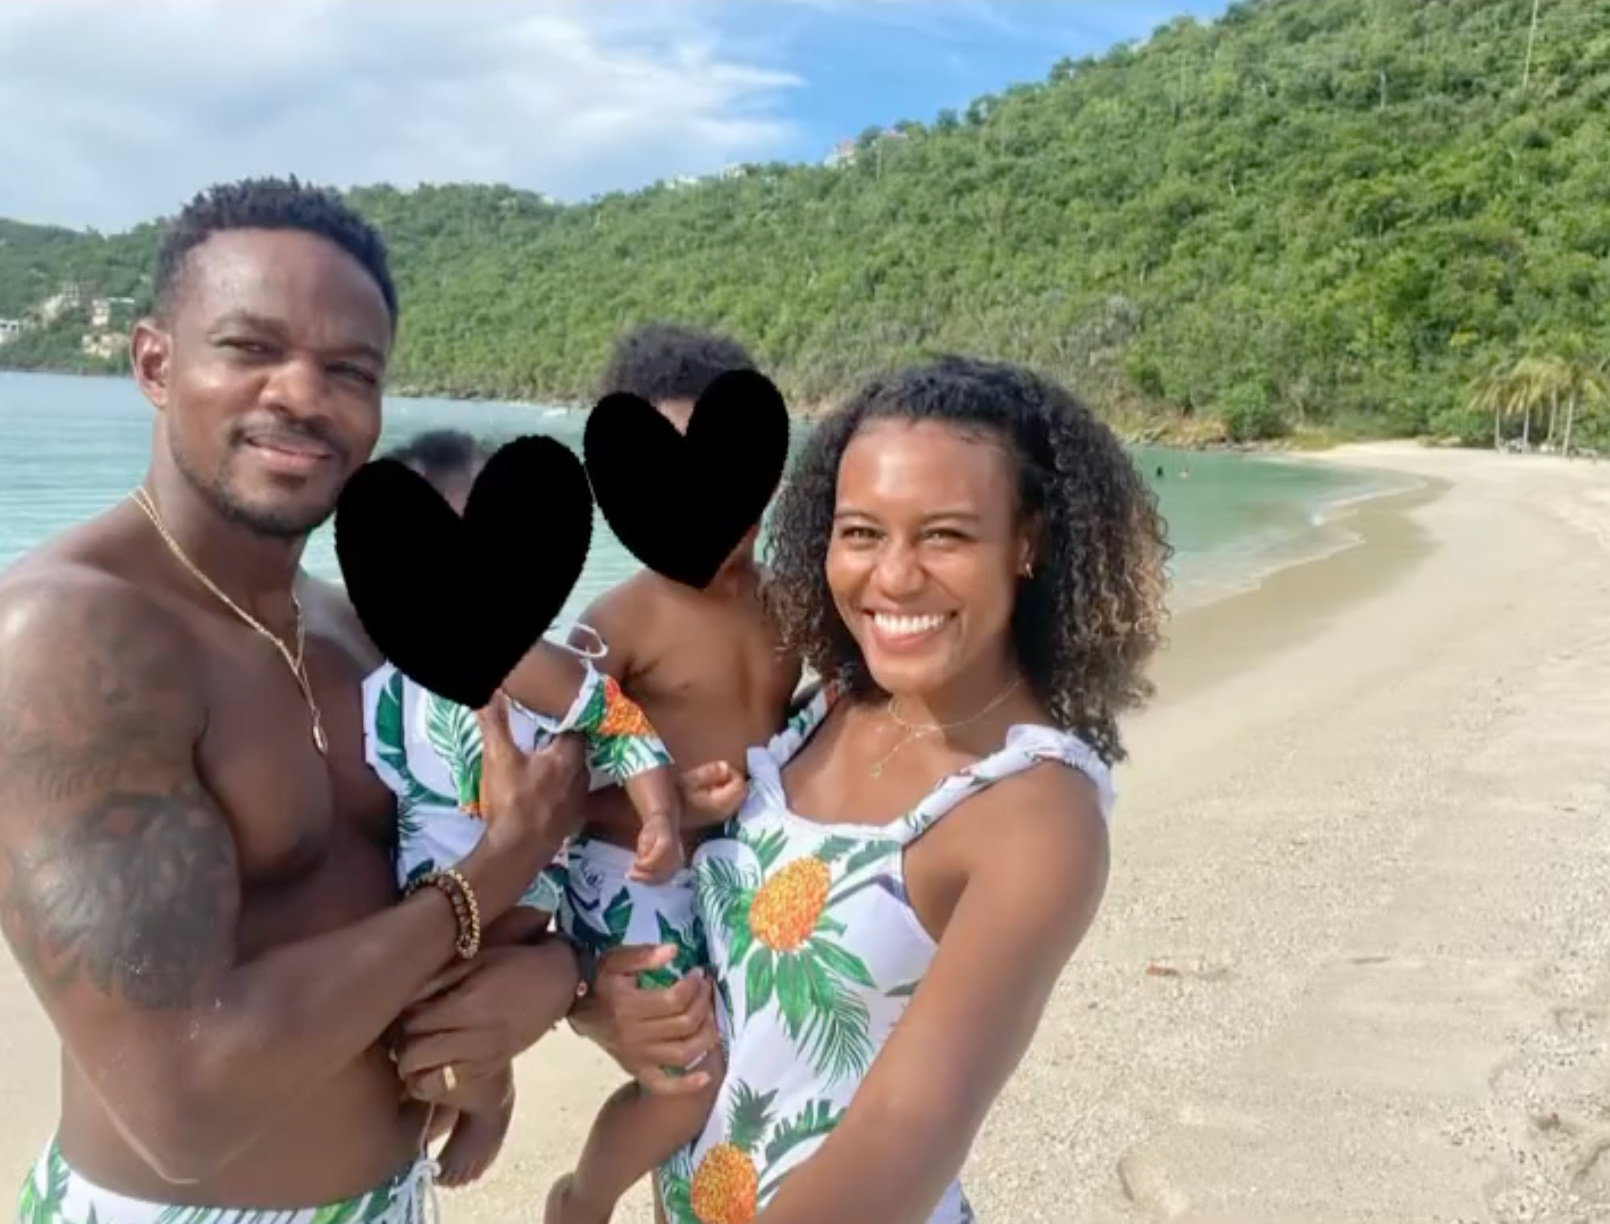 Janai and her husband Eli have decided to keep their kids' lives private